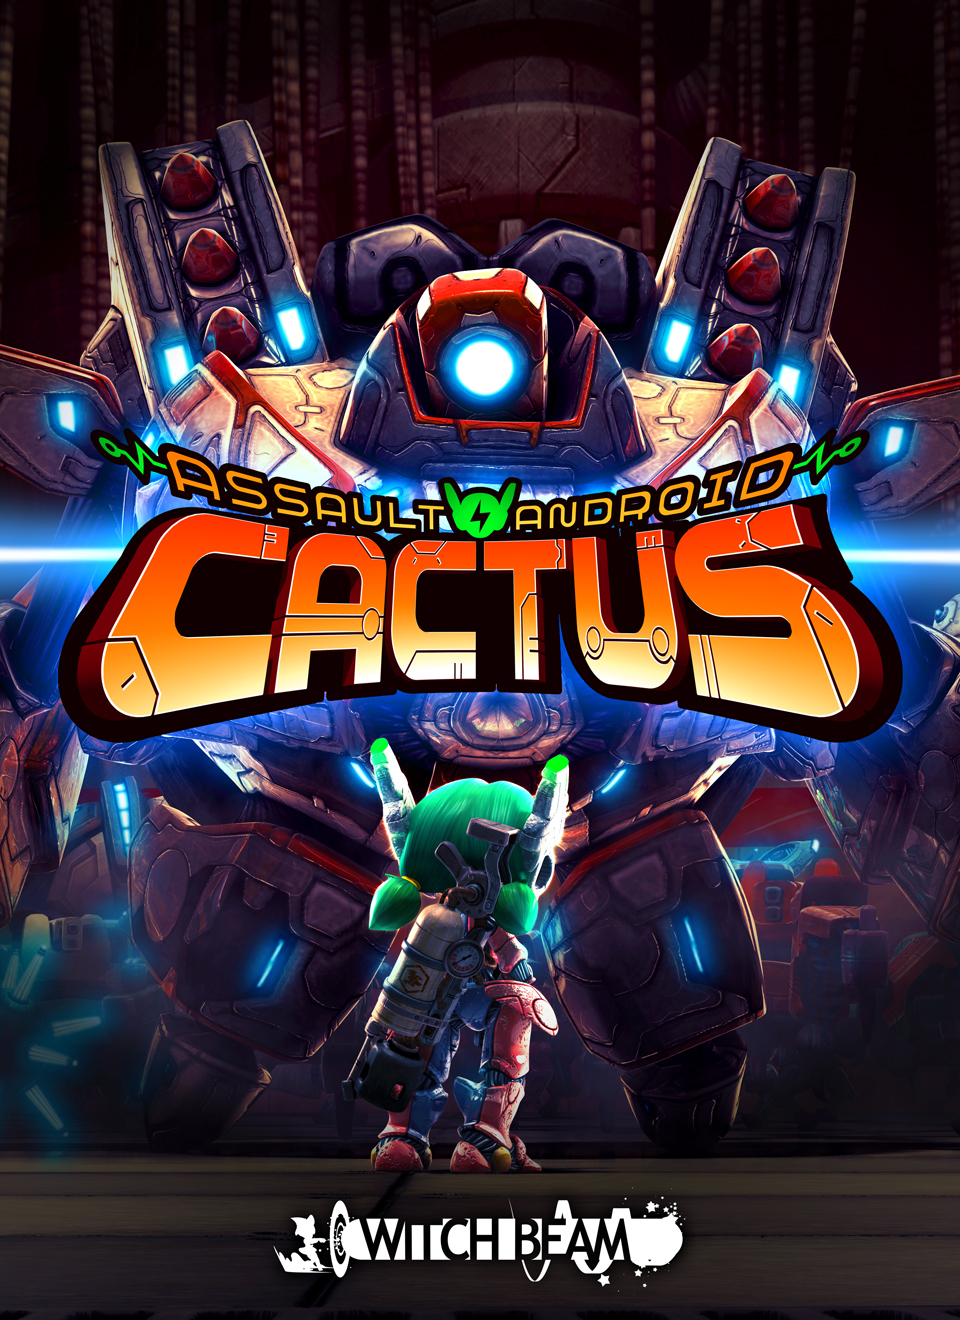 assault android cactus ps4 download